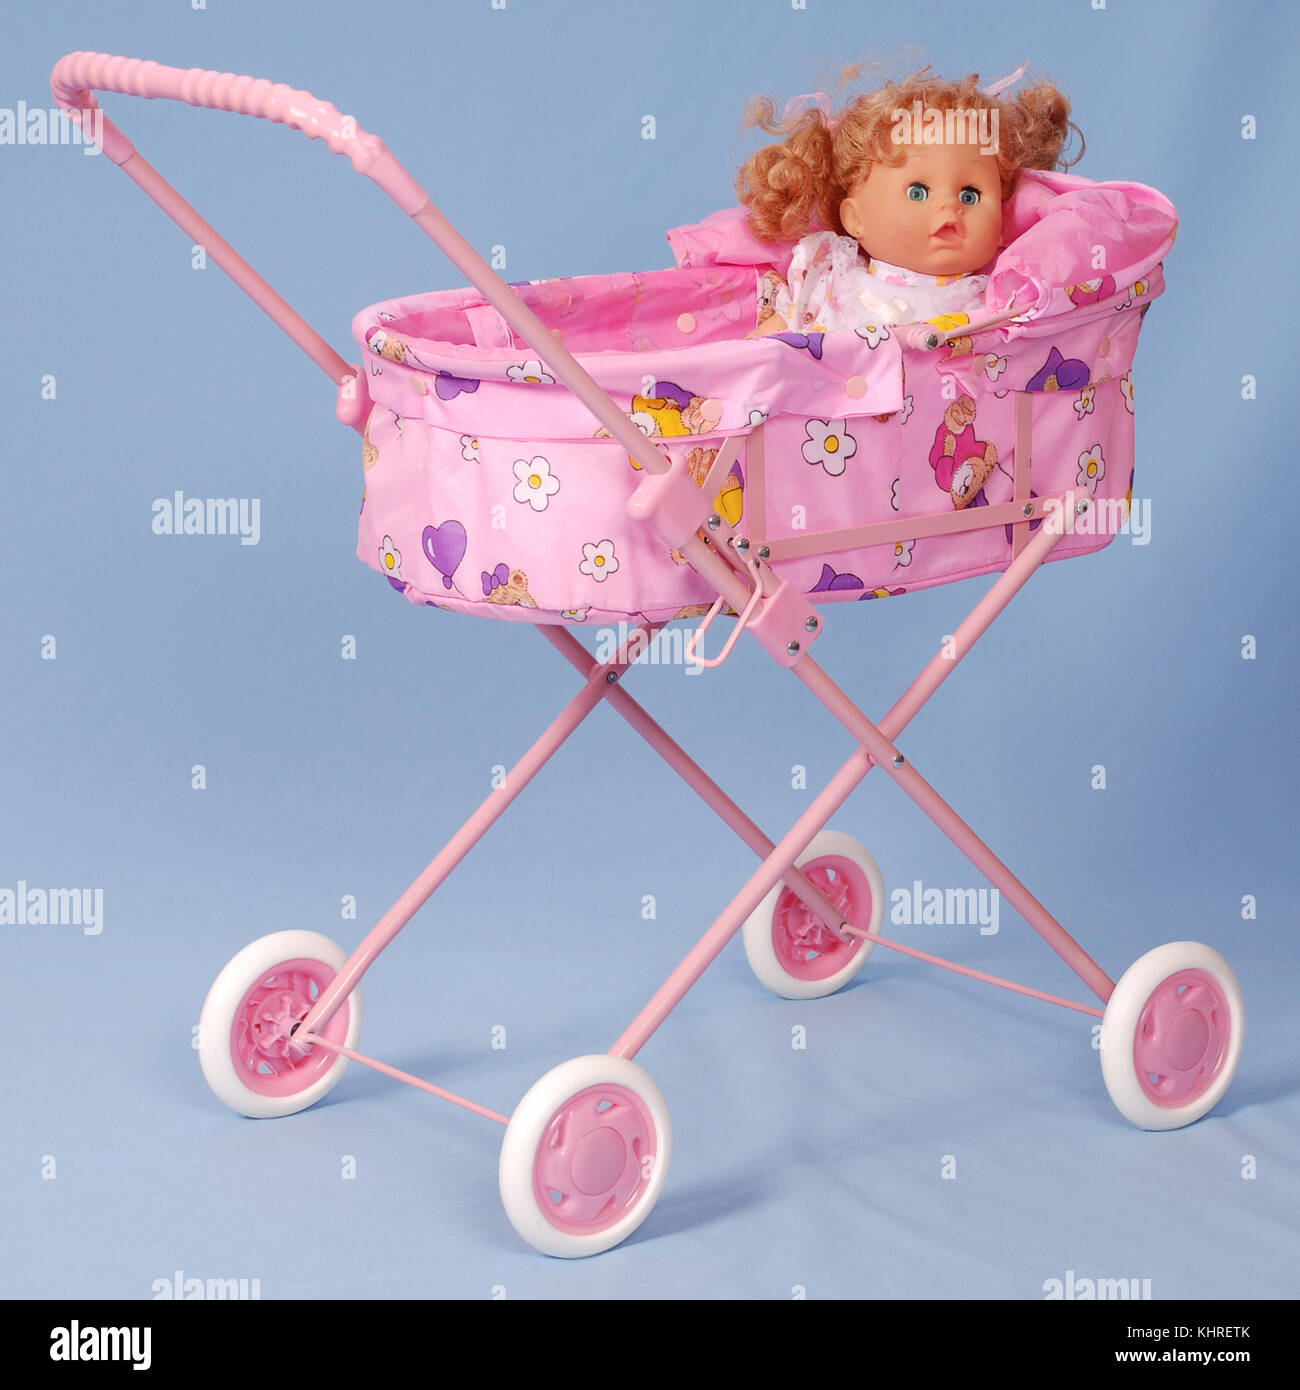 Toy baby buggy on blue background. On a carriage the doll lays. Stock Photo